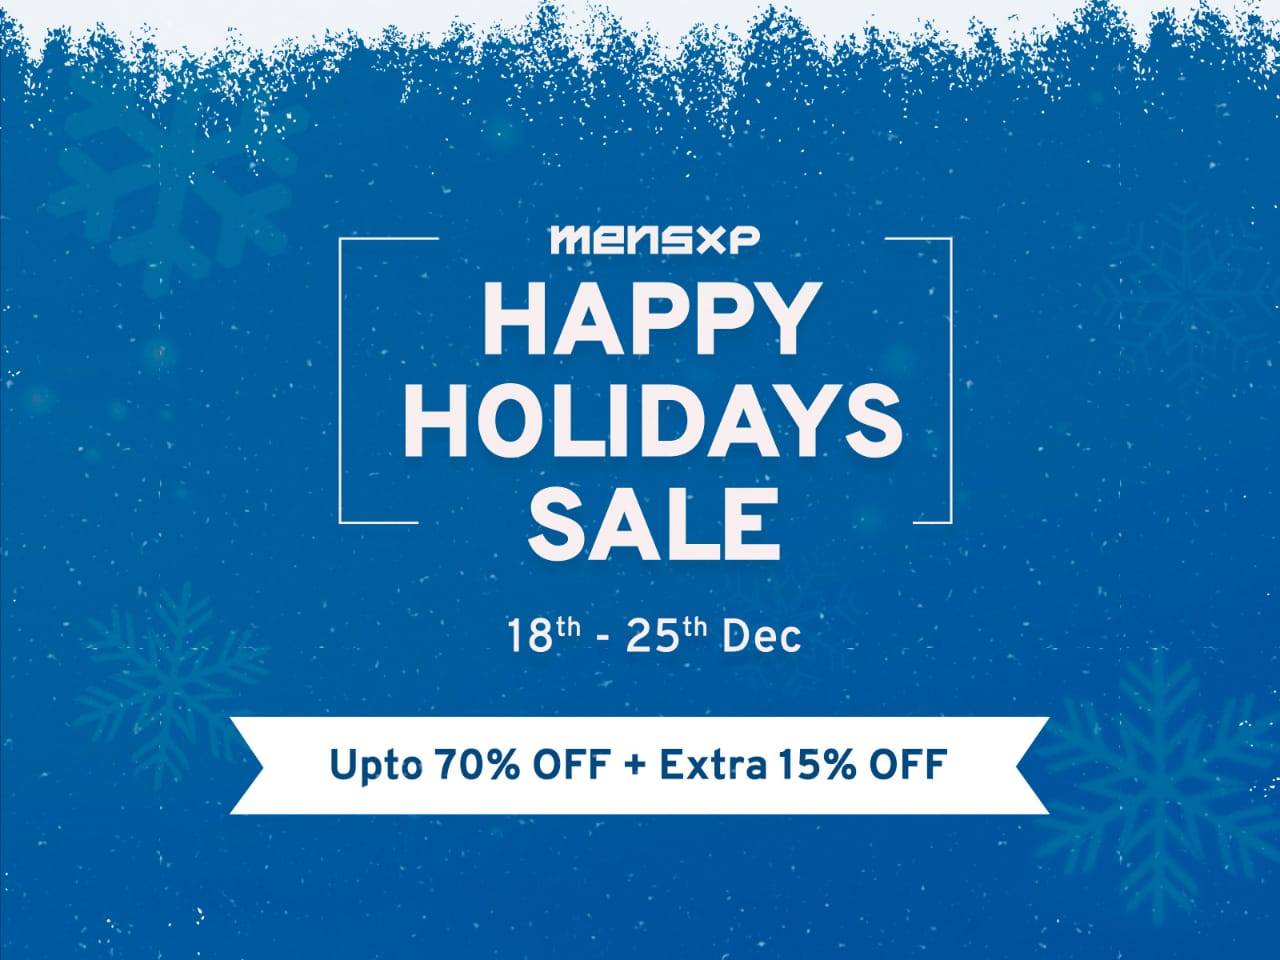 MensXP's 'Happy Holidays Sale': Get up to 70% discount on products - Times  of India